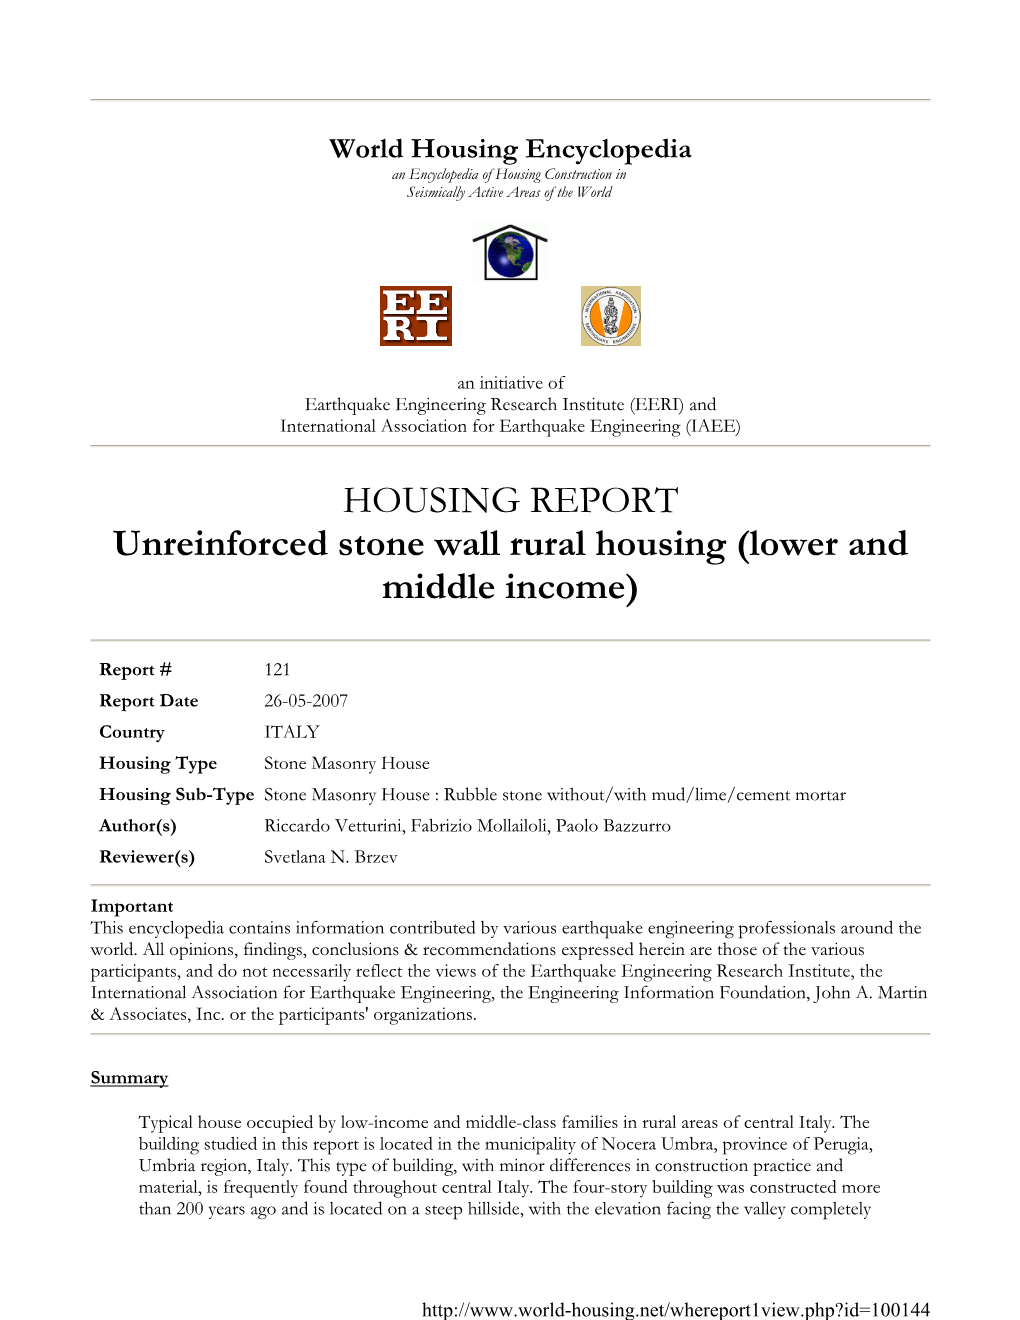 HOUSING REPORT Unreinforced Stone Wall Rural Housing (Lower and Middle Income)